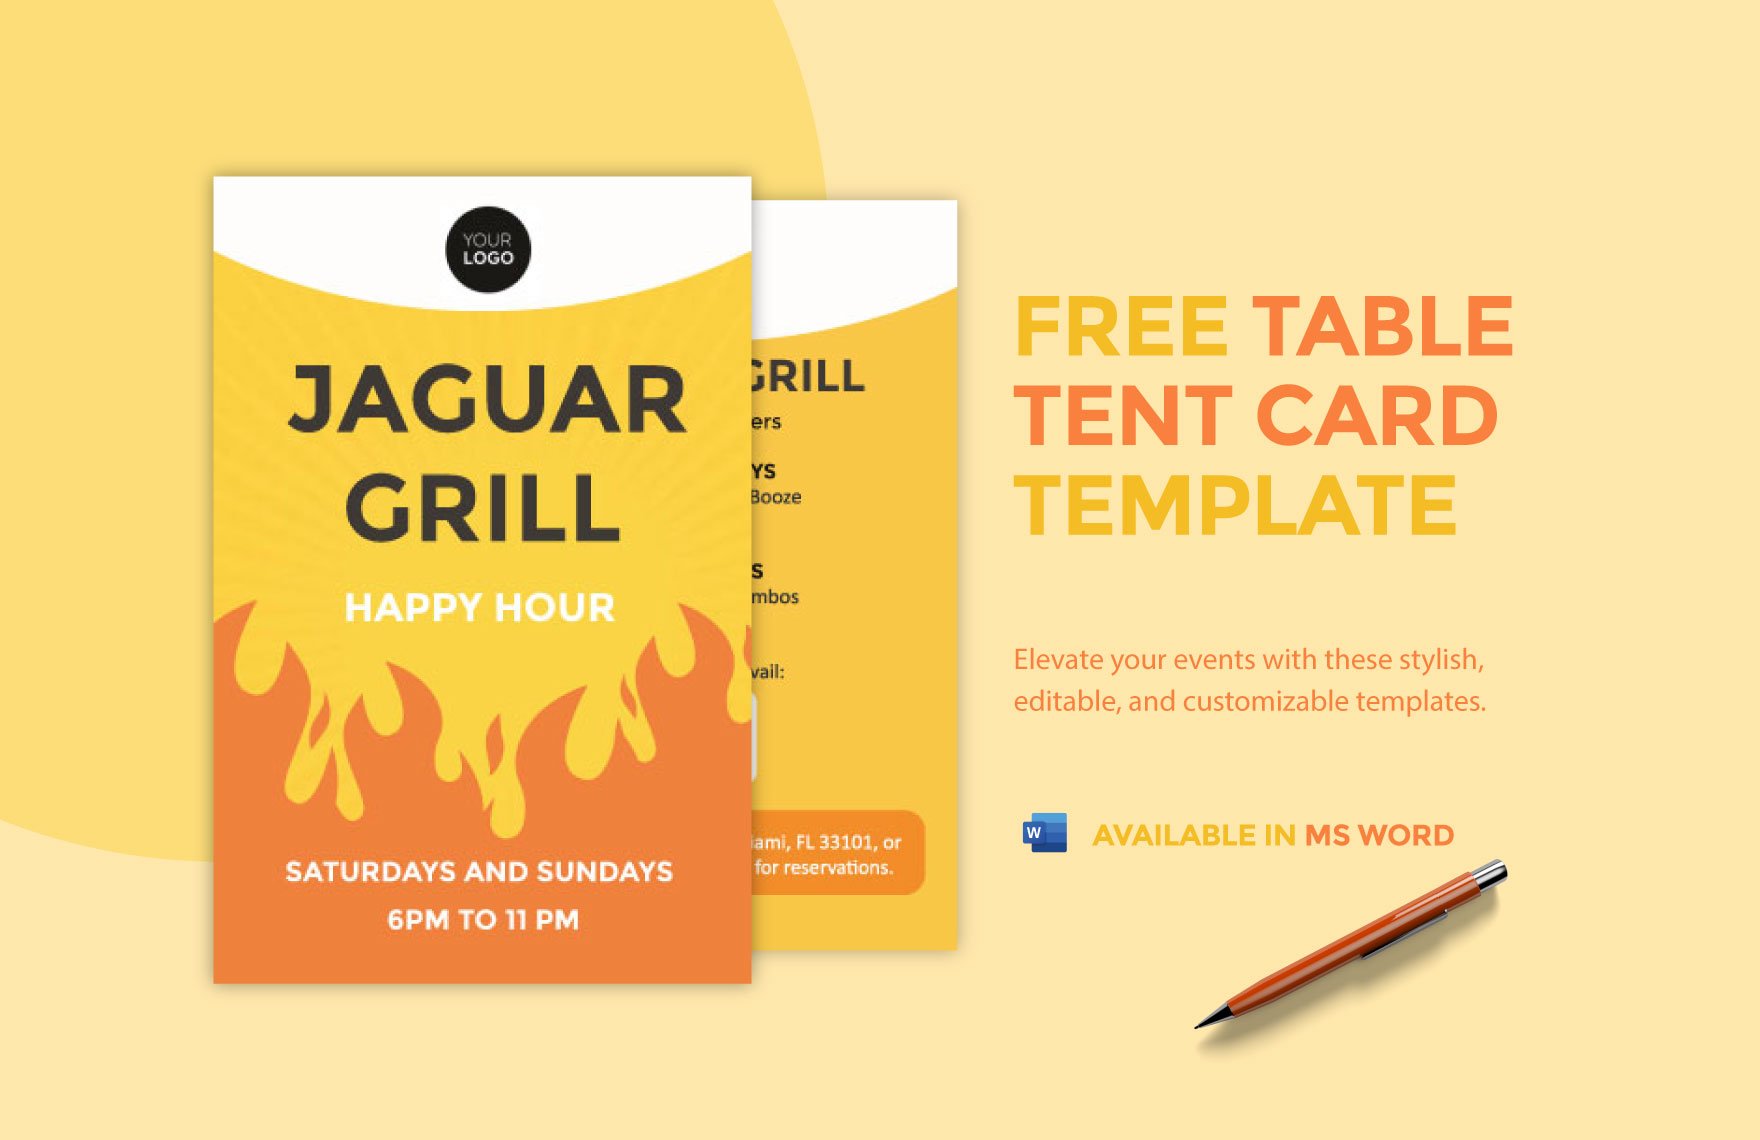 Free Table Tent Card Template